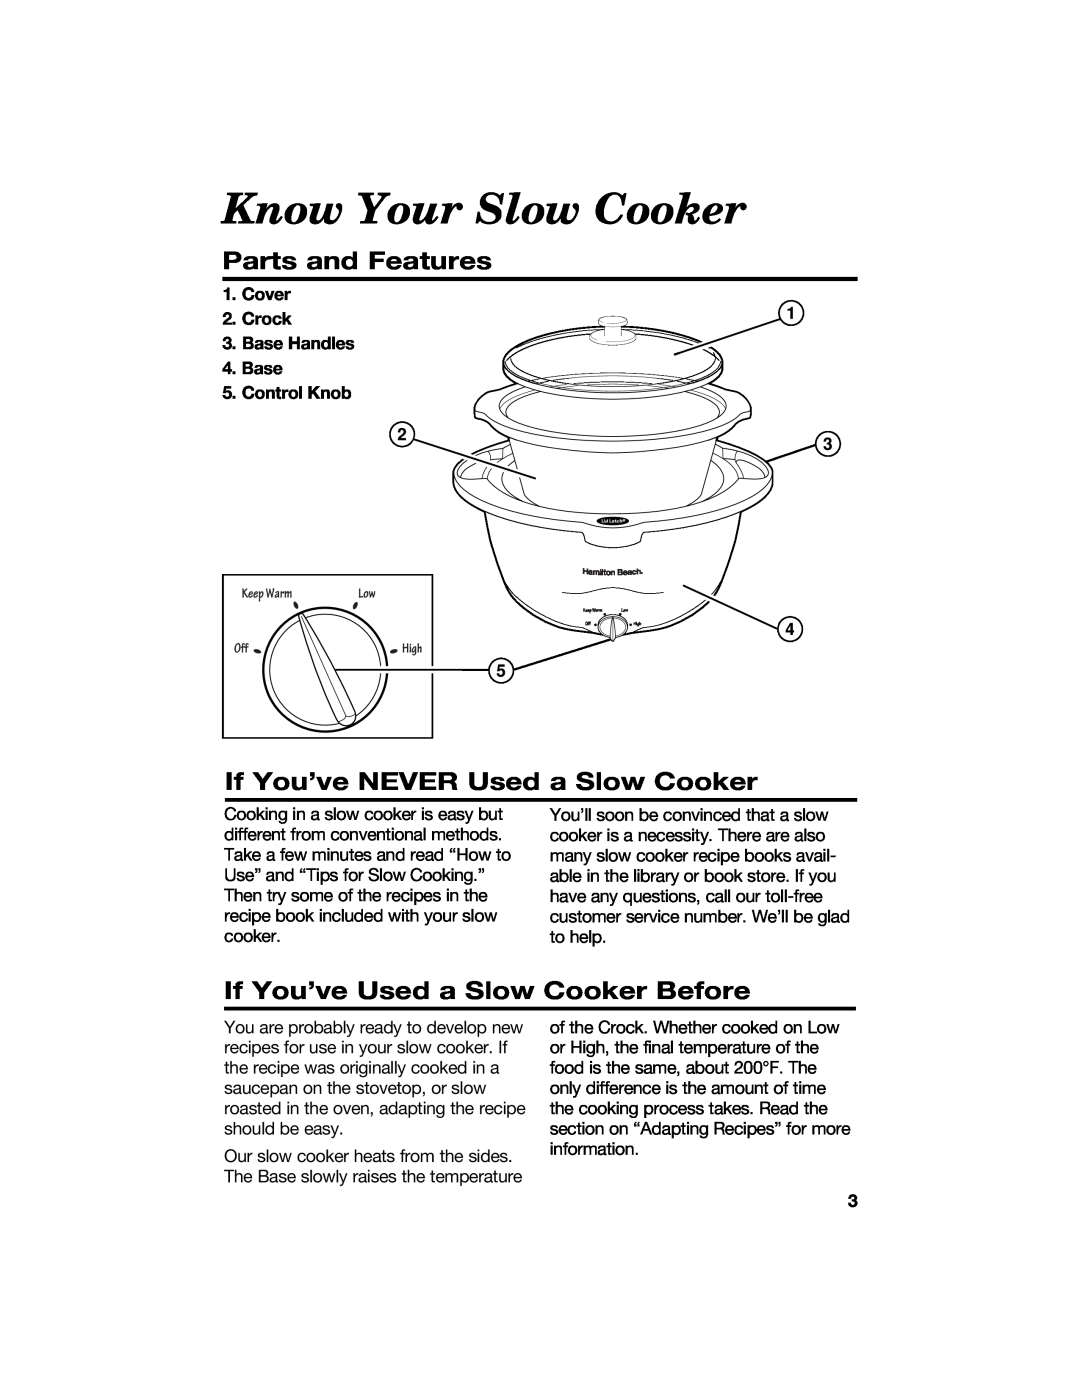 Hamilton Beach 840071200 manual Know Your Slow Cooker, Parts and Features, If You’ve NEVER Used a Slow Cooker, Control Knob 